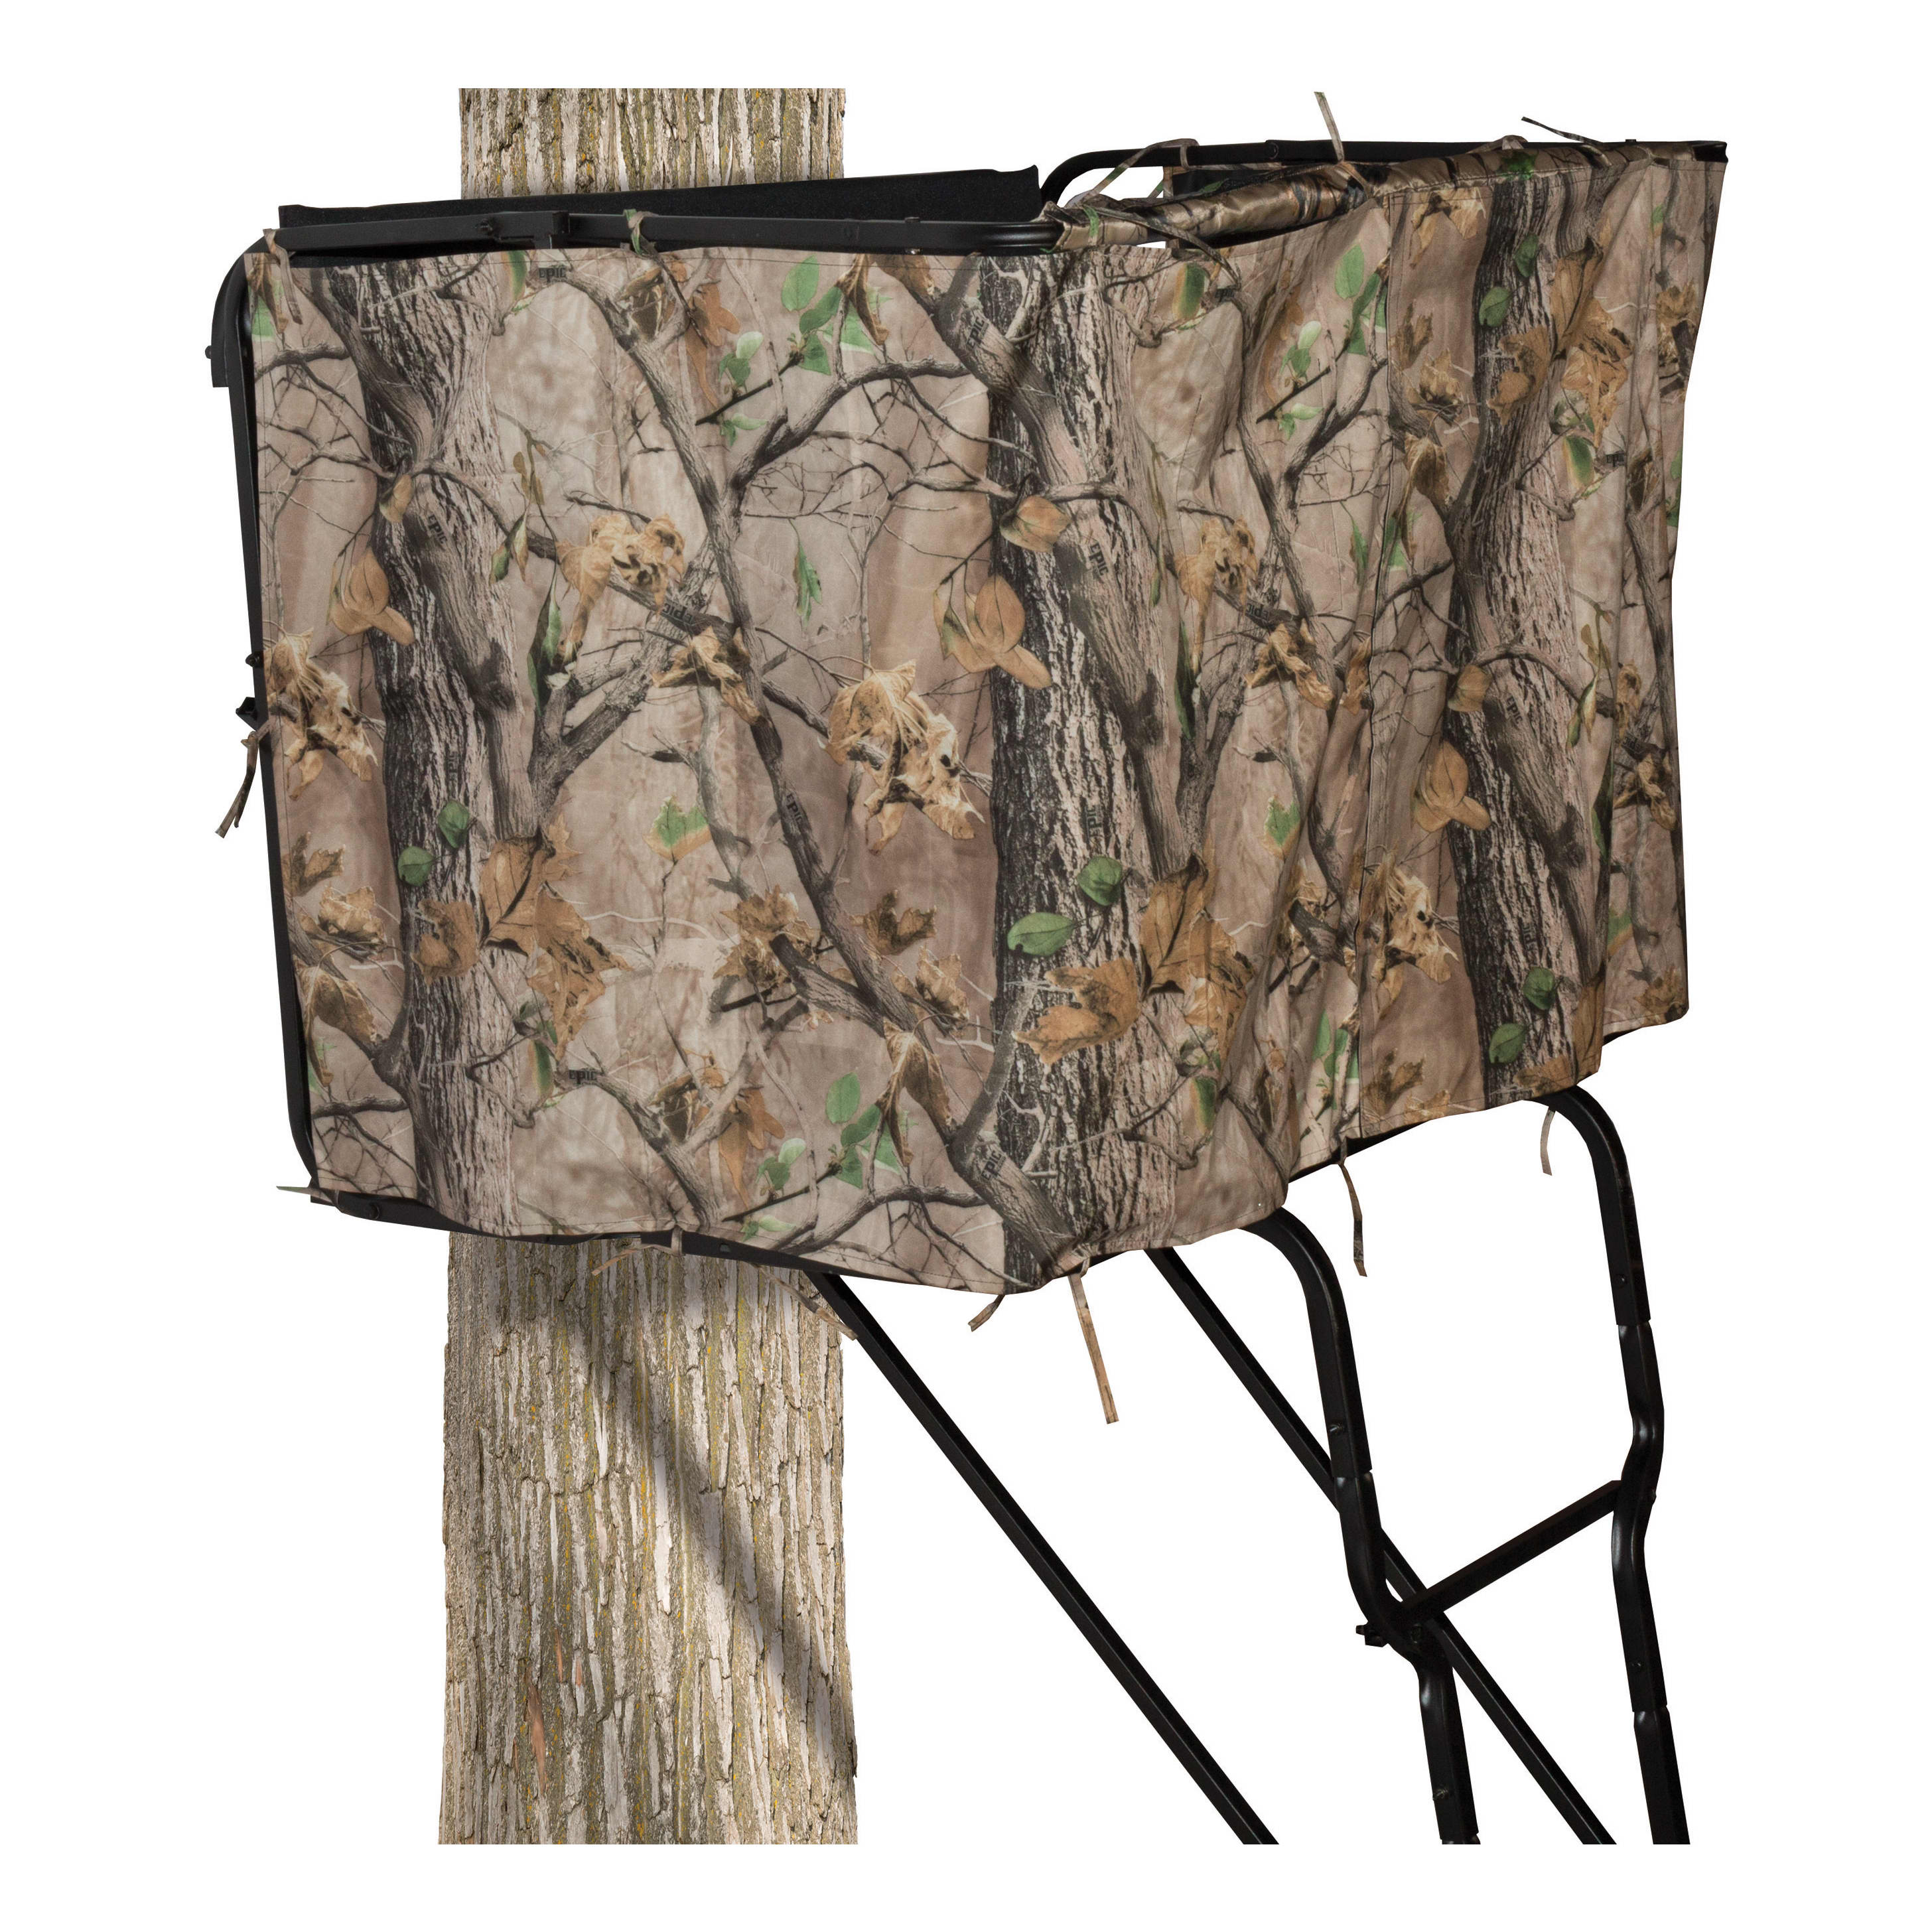 Big Game Deluxe Universal Blind Kit